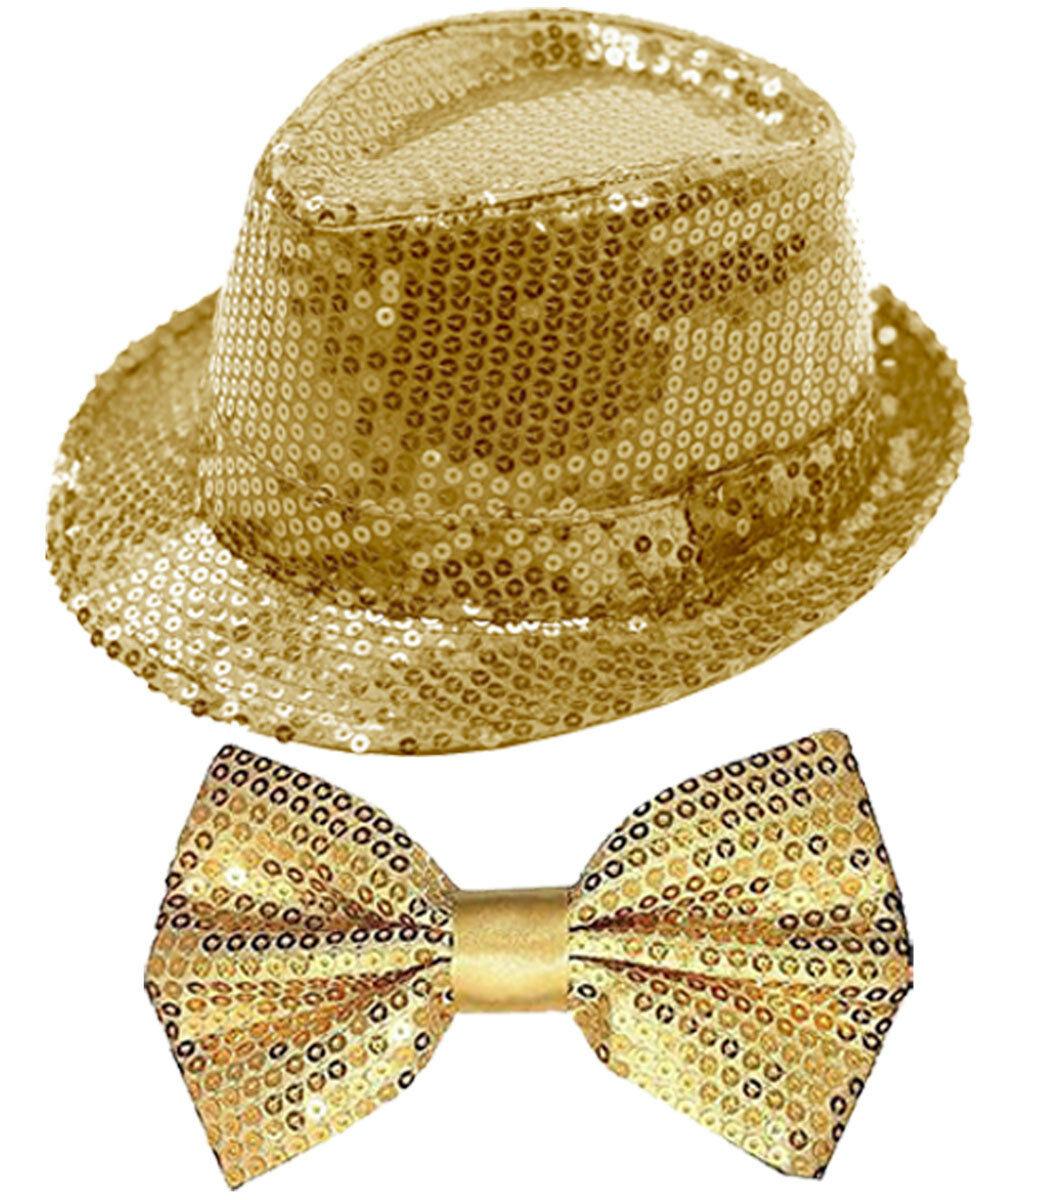 Sparkling Gold Sequin Hat Braces Dicky Dickie Bow Tie Fancy Party Accessory Set - Labreeze